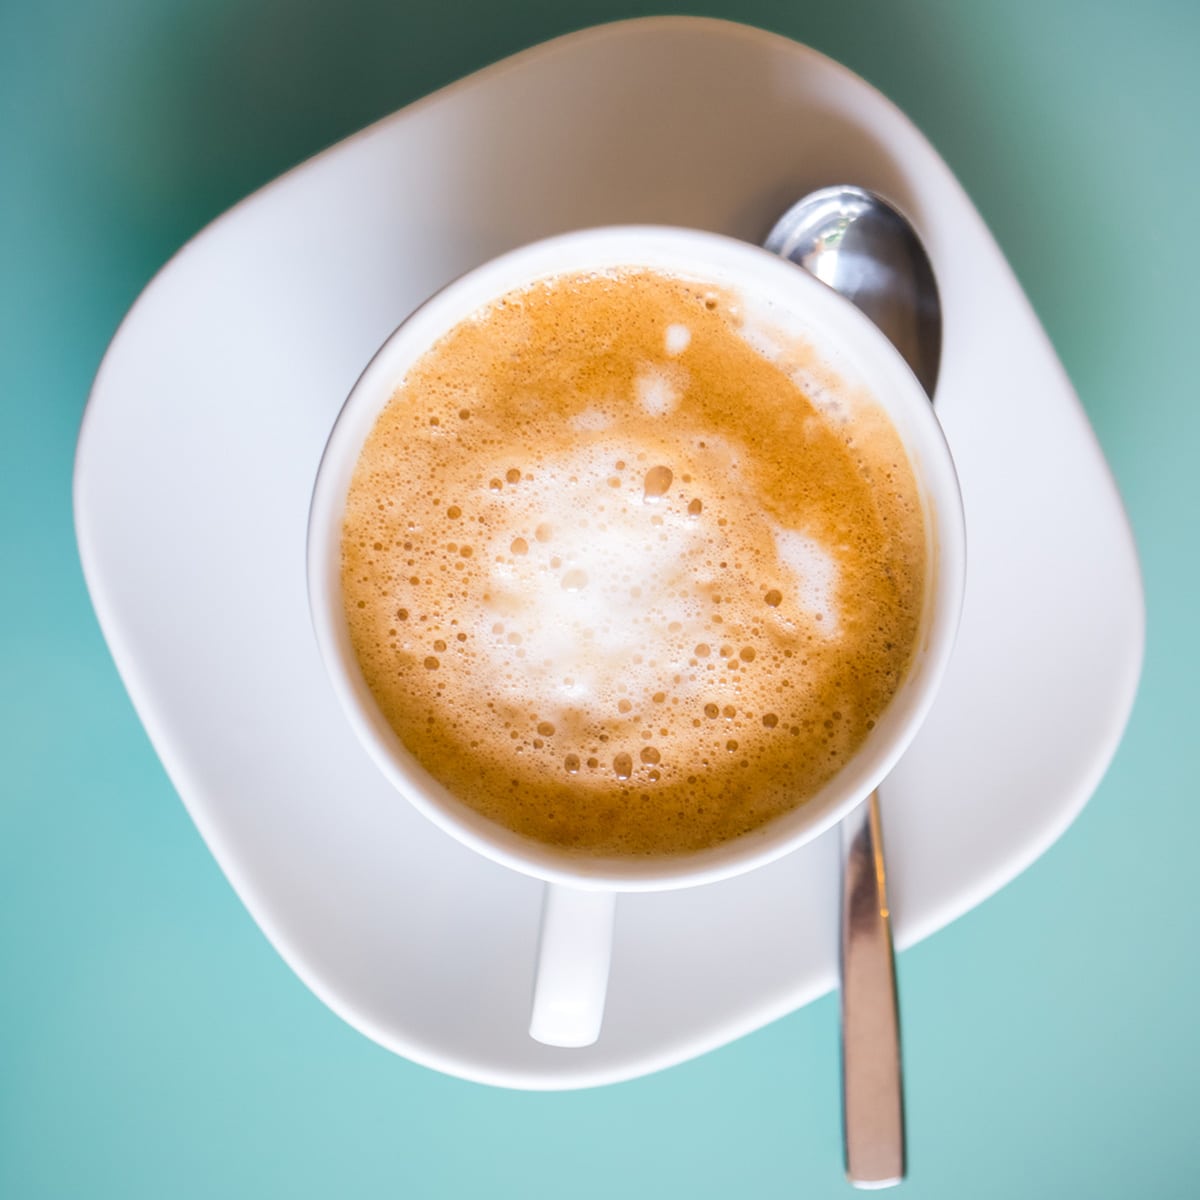 Do lattes taste better hot or cold? Coffee drinks like lattes, espressos, and cappuccinos are mostly served between 155° to 165° F. A cup of coffee on the go should be about 160° F.